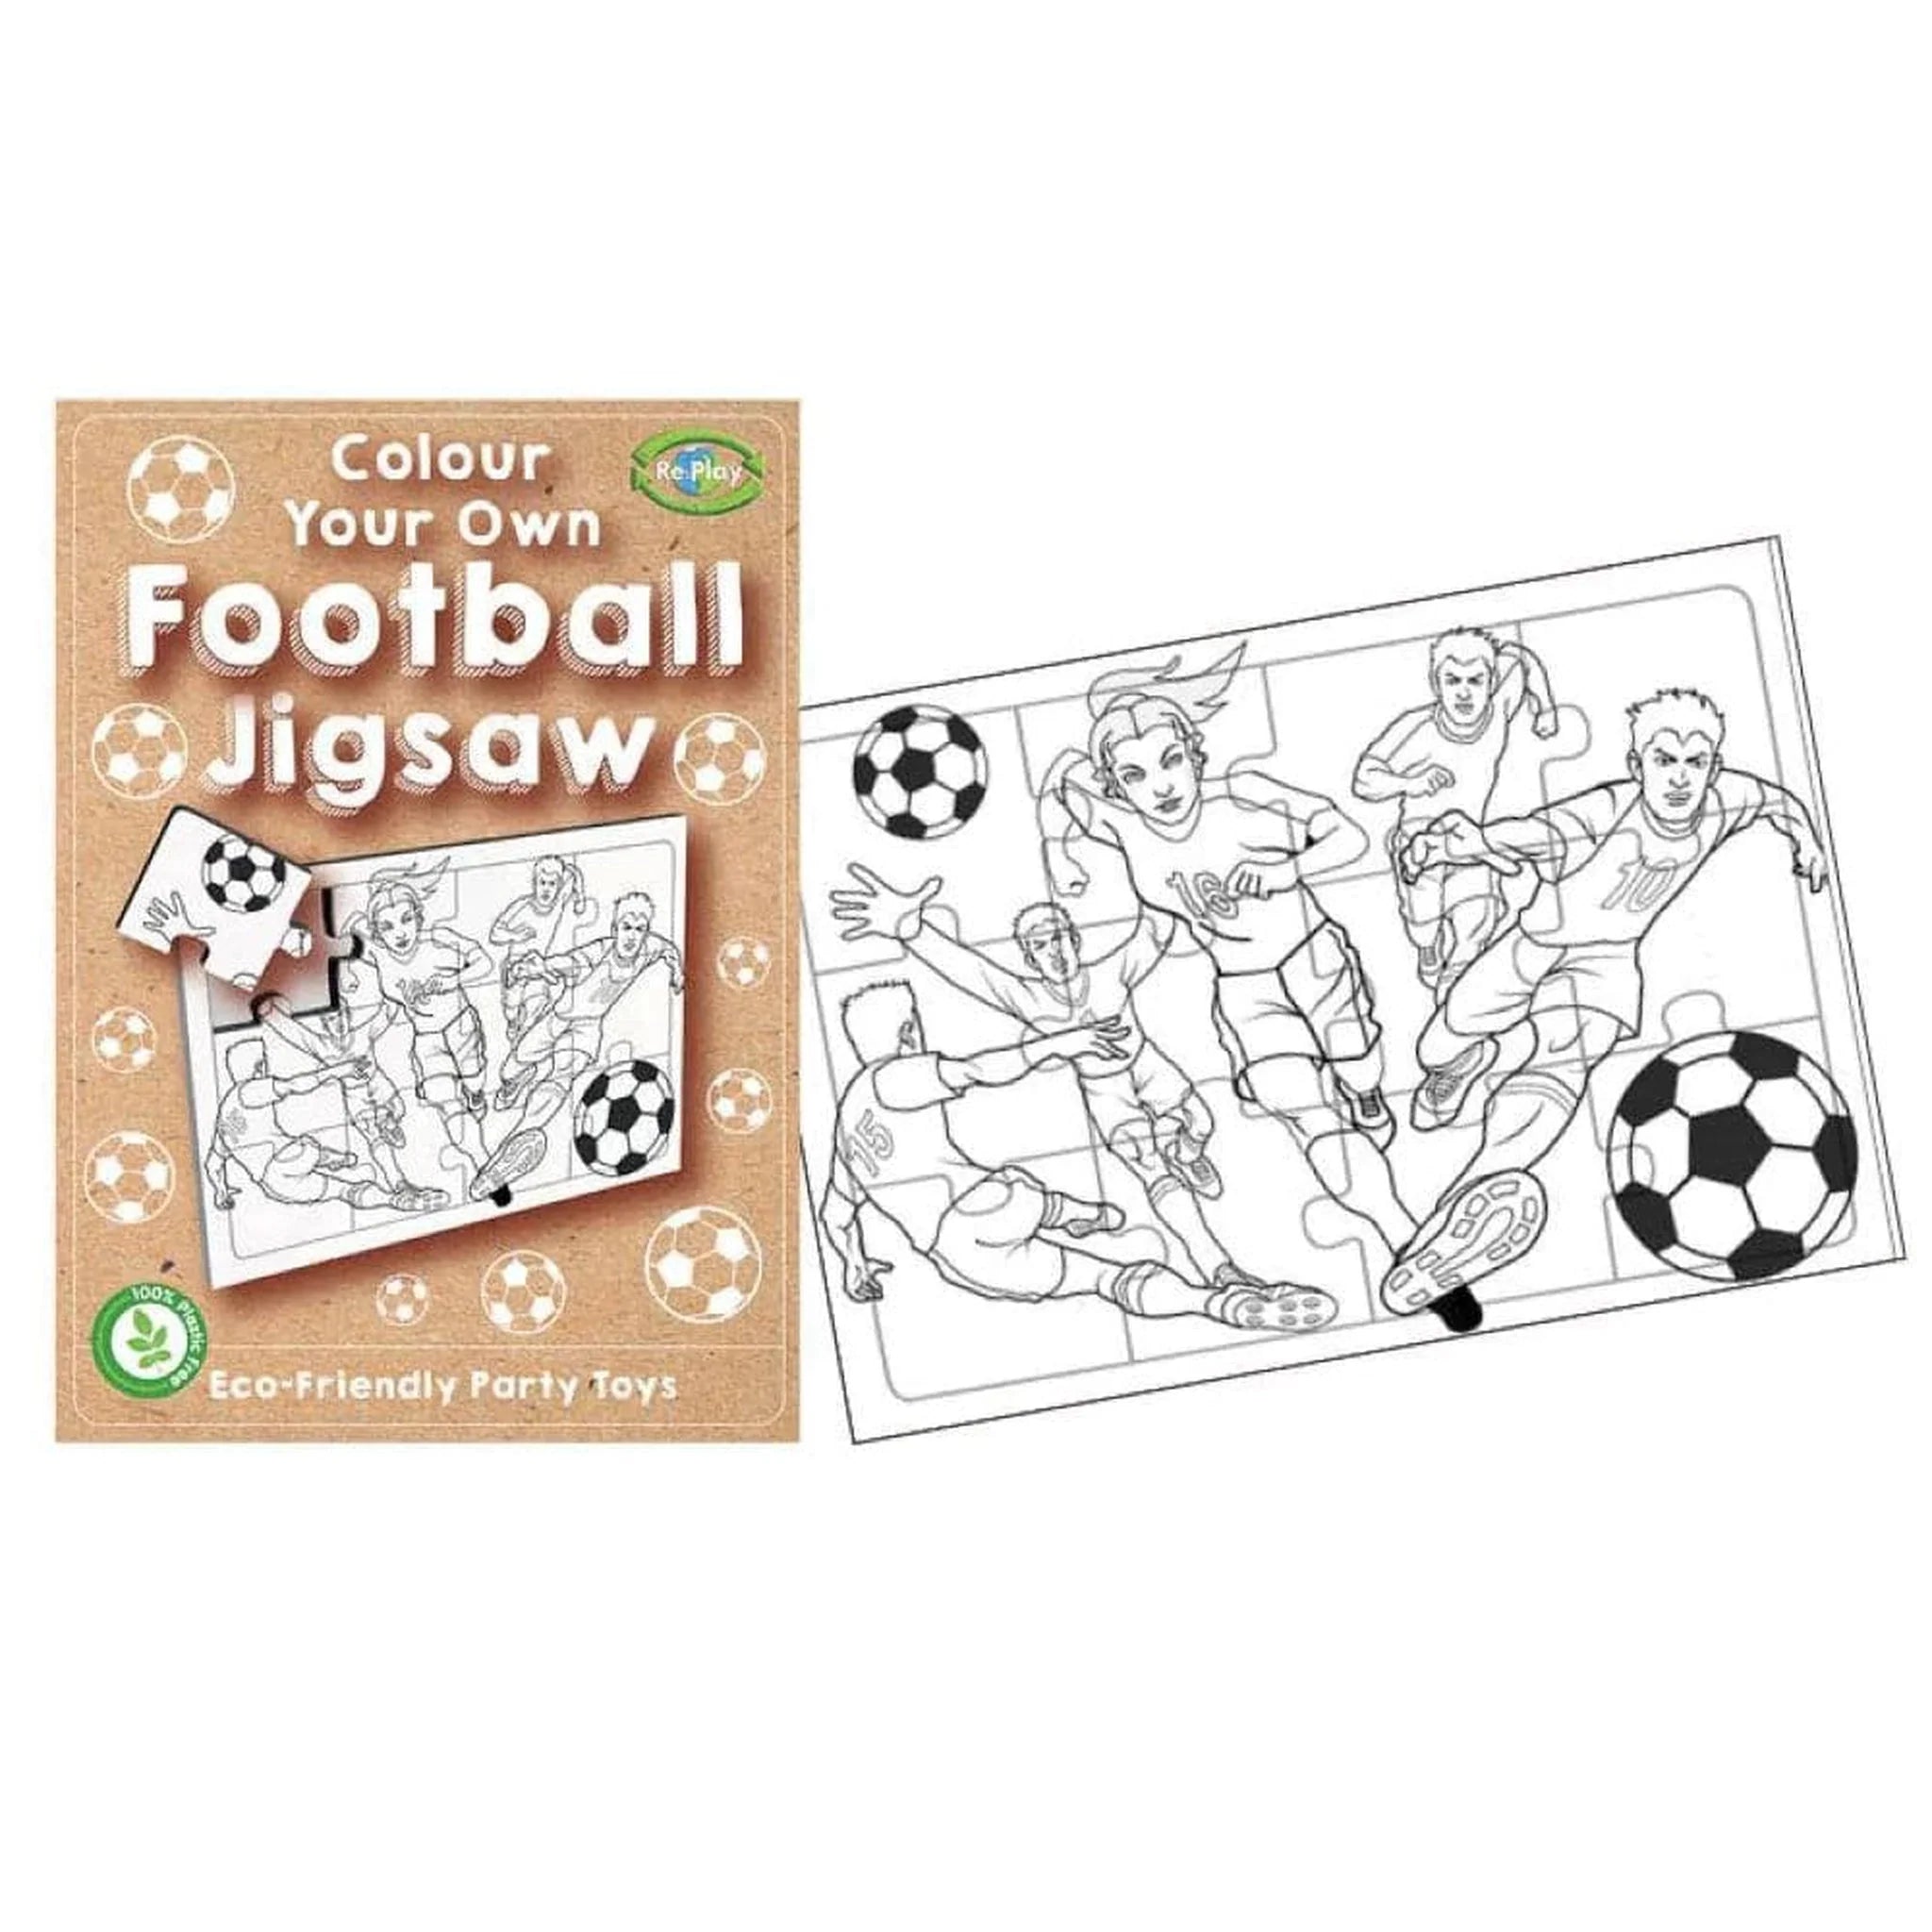 Colour Your Own Football Jigsaw - Kids Party Craft